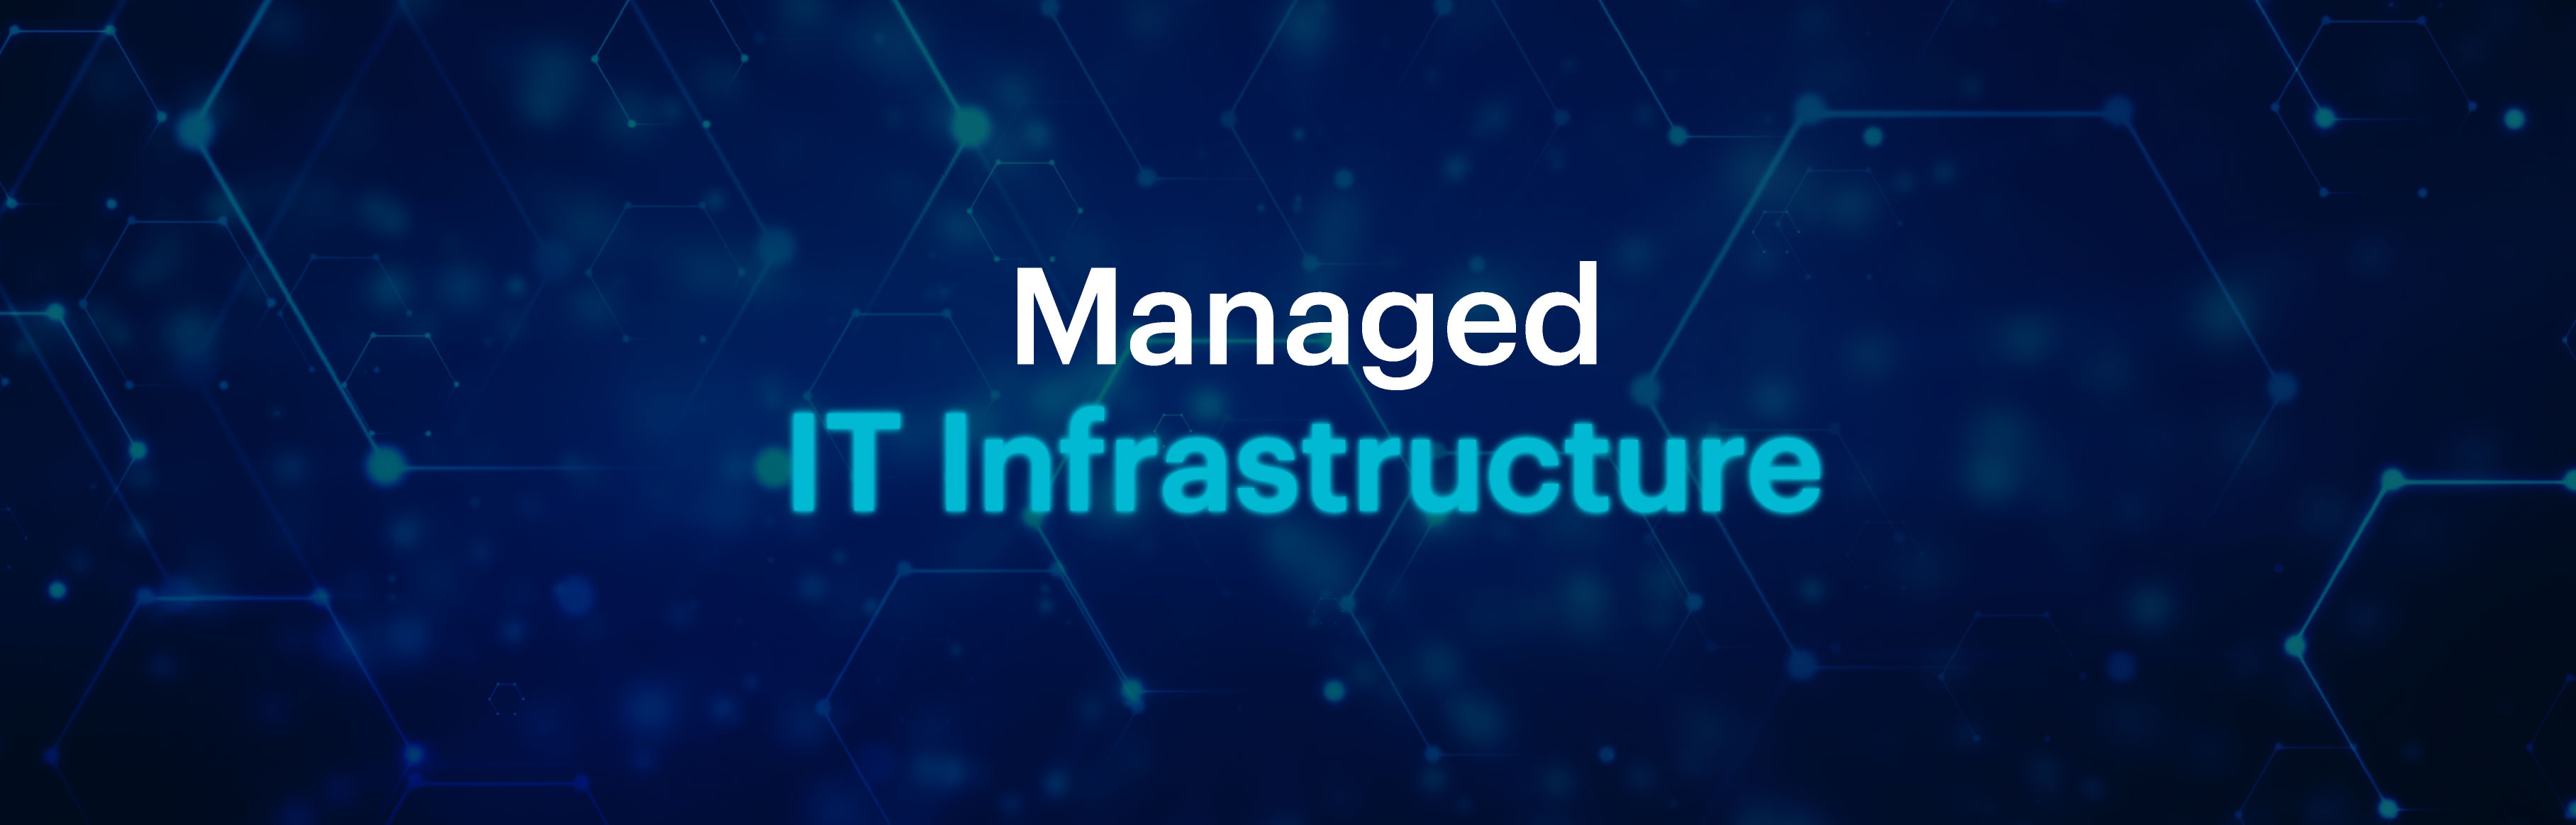 Managed IT Infrastructure